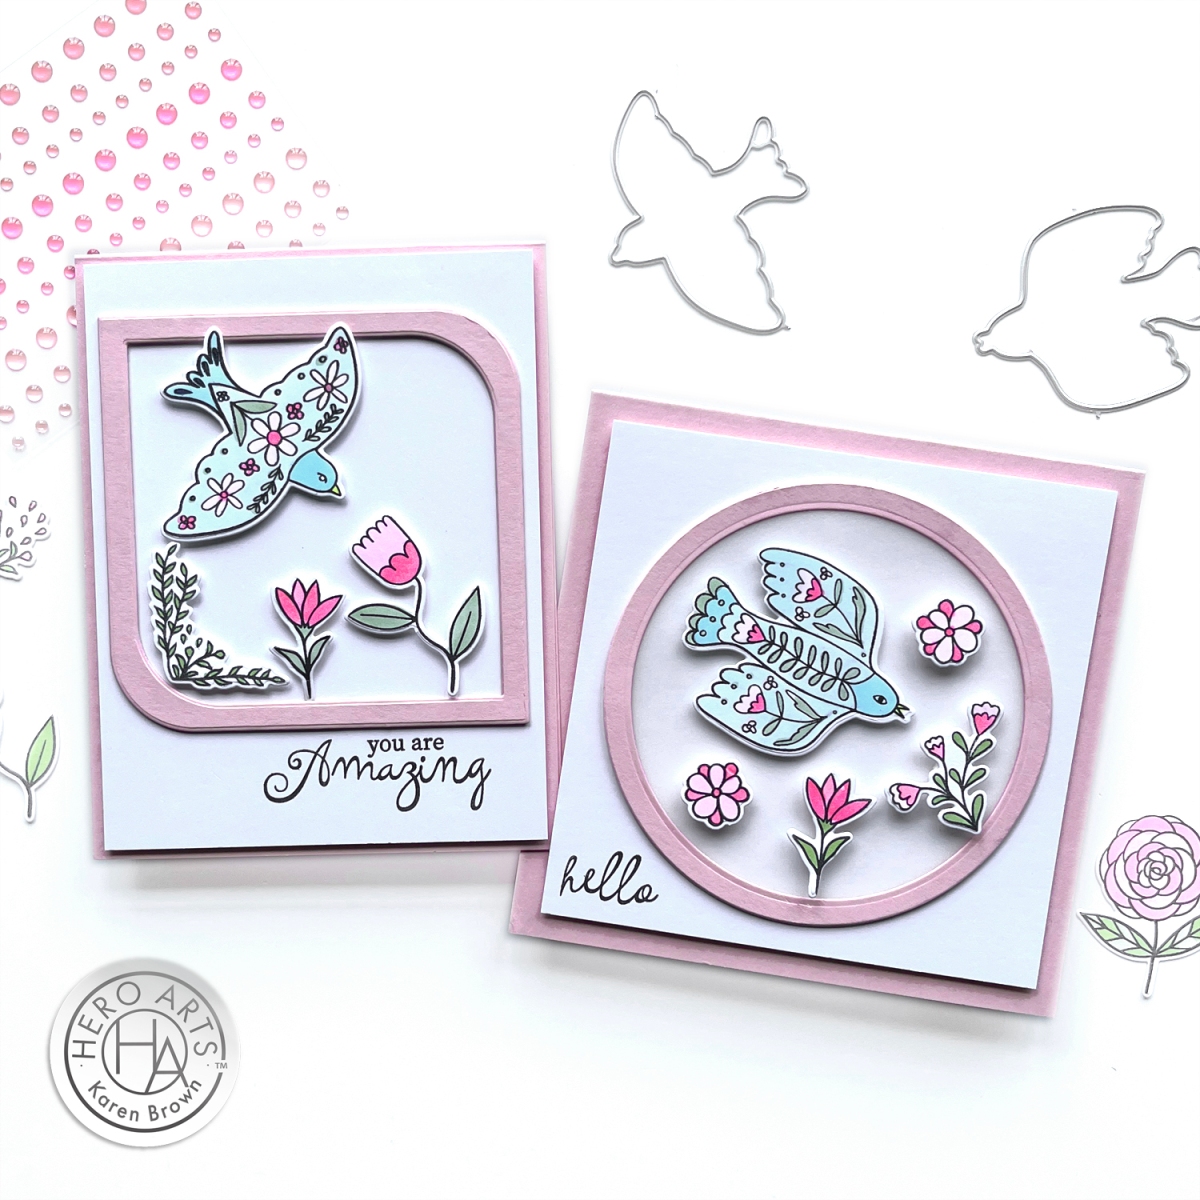 2 floral bird scene cards framed with infinity die cut frames in a pink, blue and white color scheme.